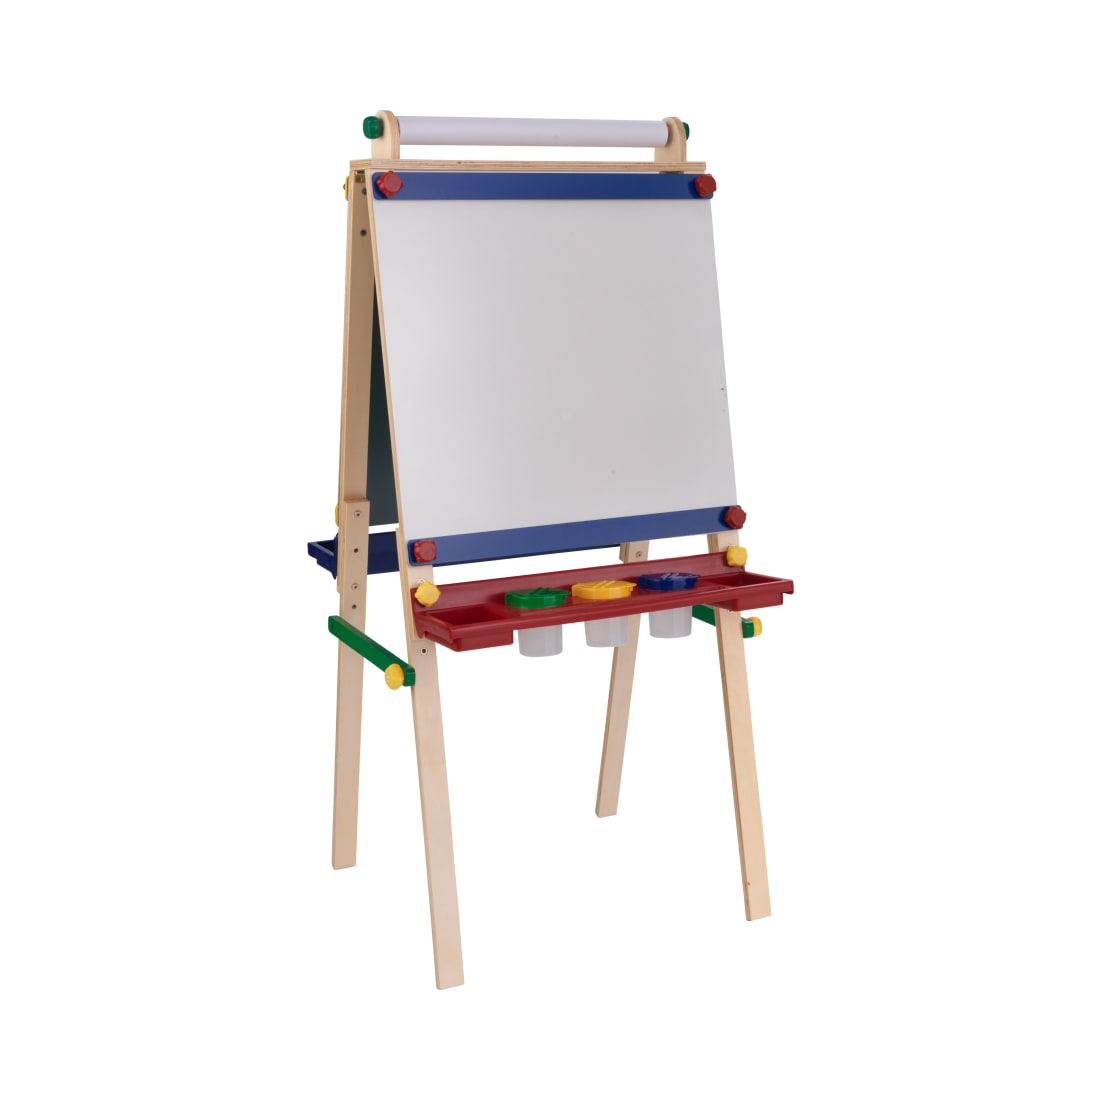 KidKraft Double-Sided Wooden Artist Easel with Paper Roll, Children's Furniture - Primary